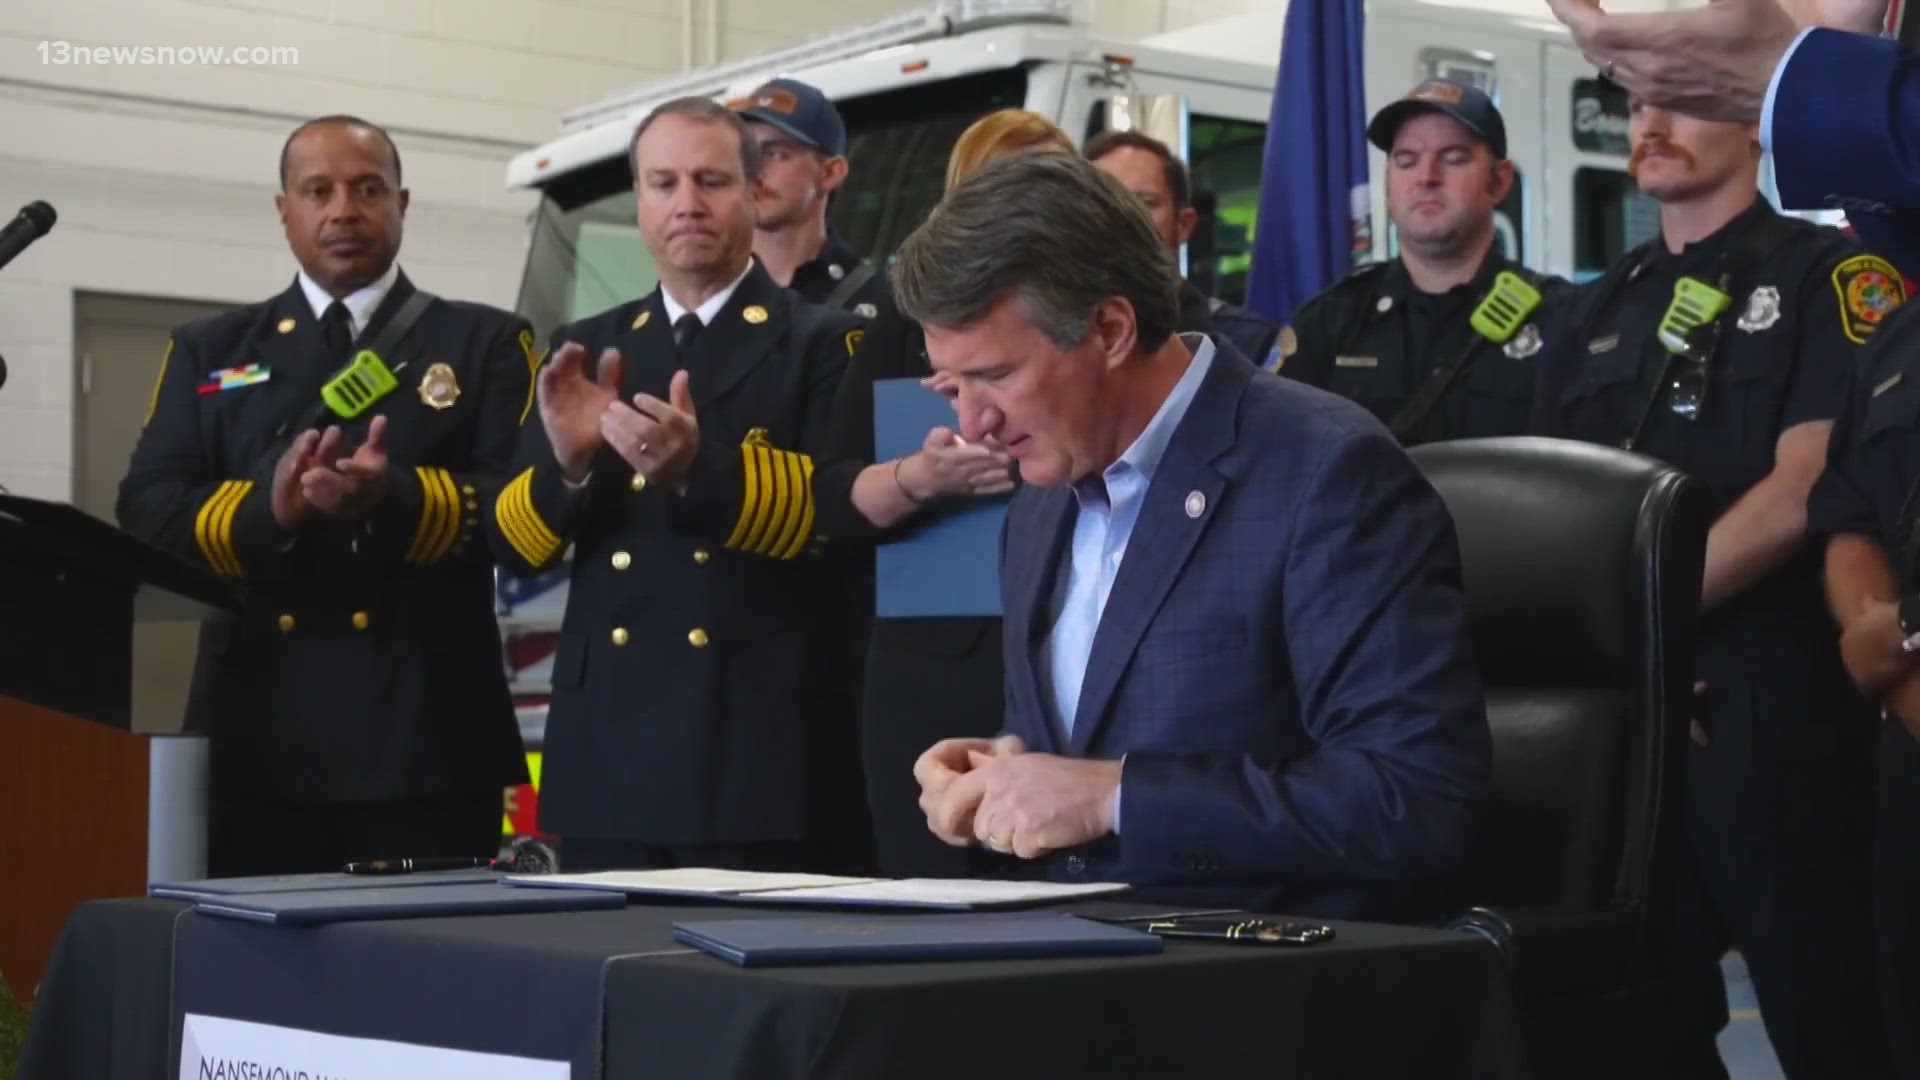 The Republican governor signed several bills aimed at helping Virginia's firefighters and first responders.